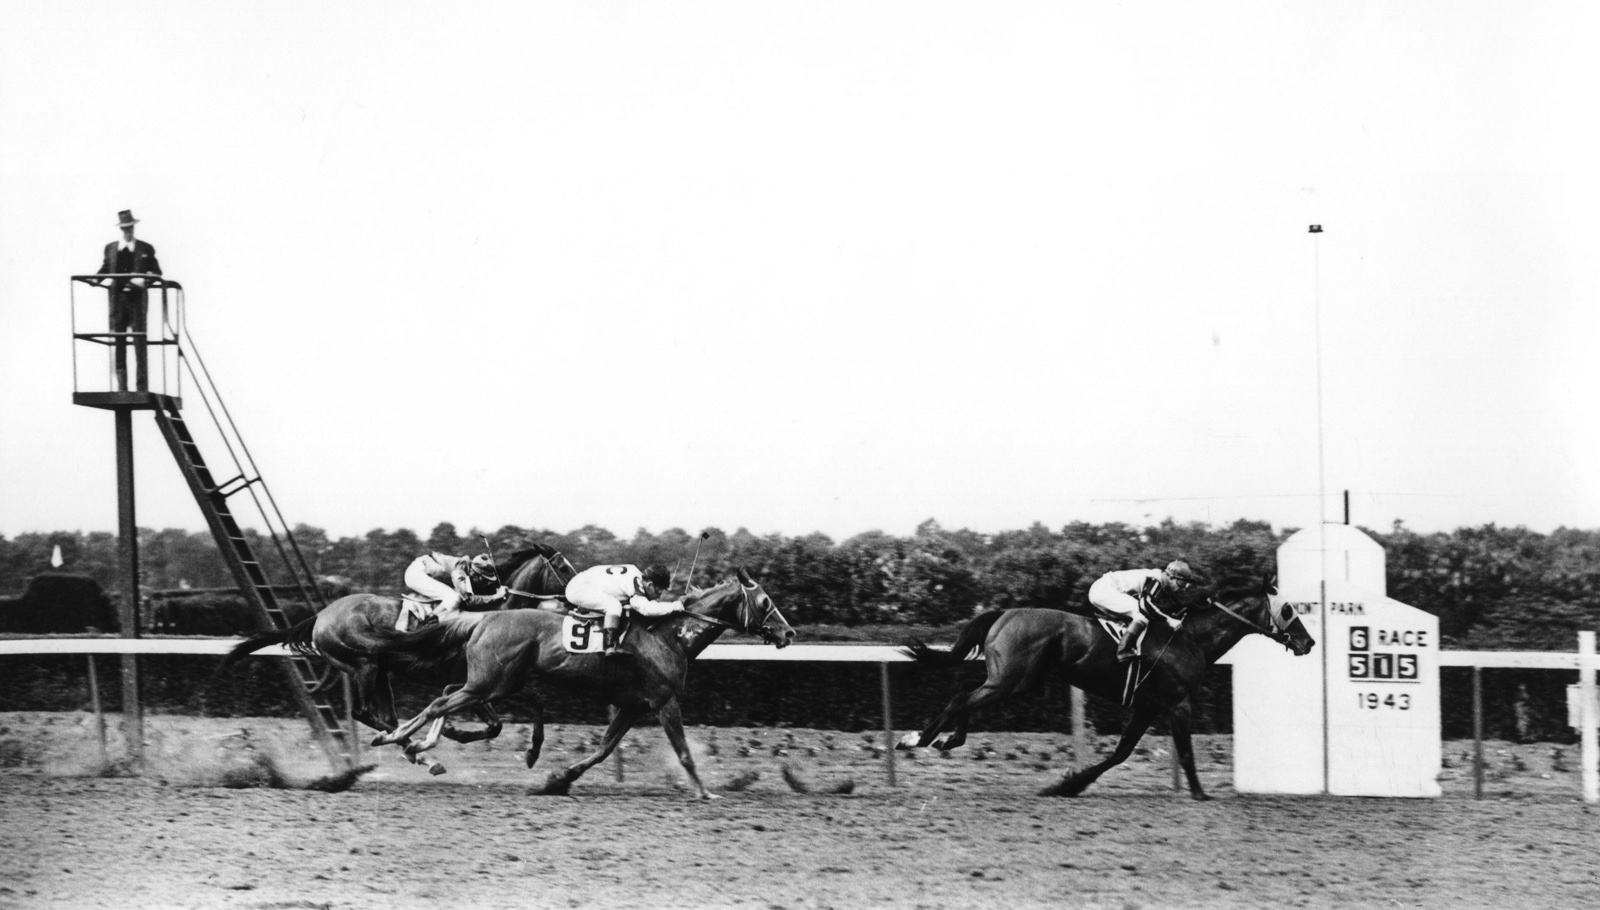 Devil Diver (George Woolf up) winning the 1943 Metropolitan Handicap at Belmont Park (Mike Sirico/Museum Collection)